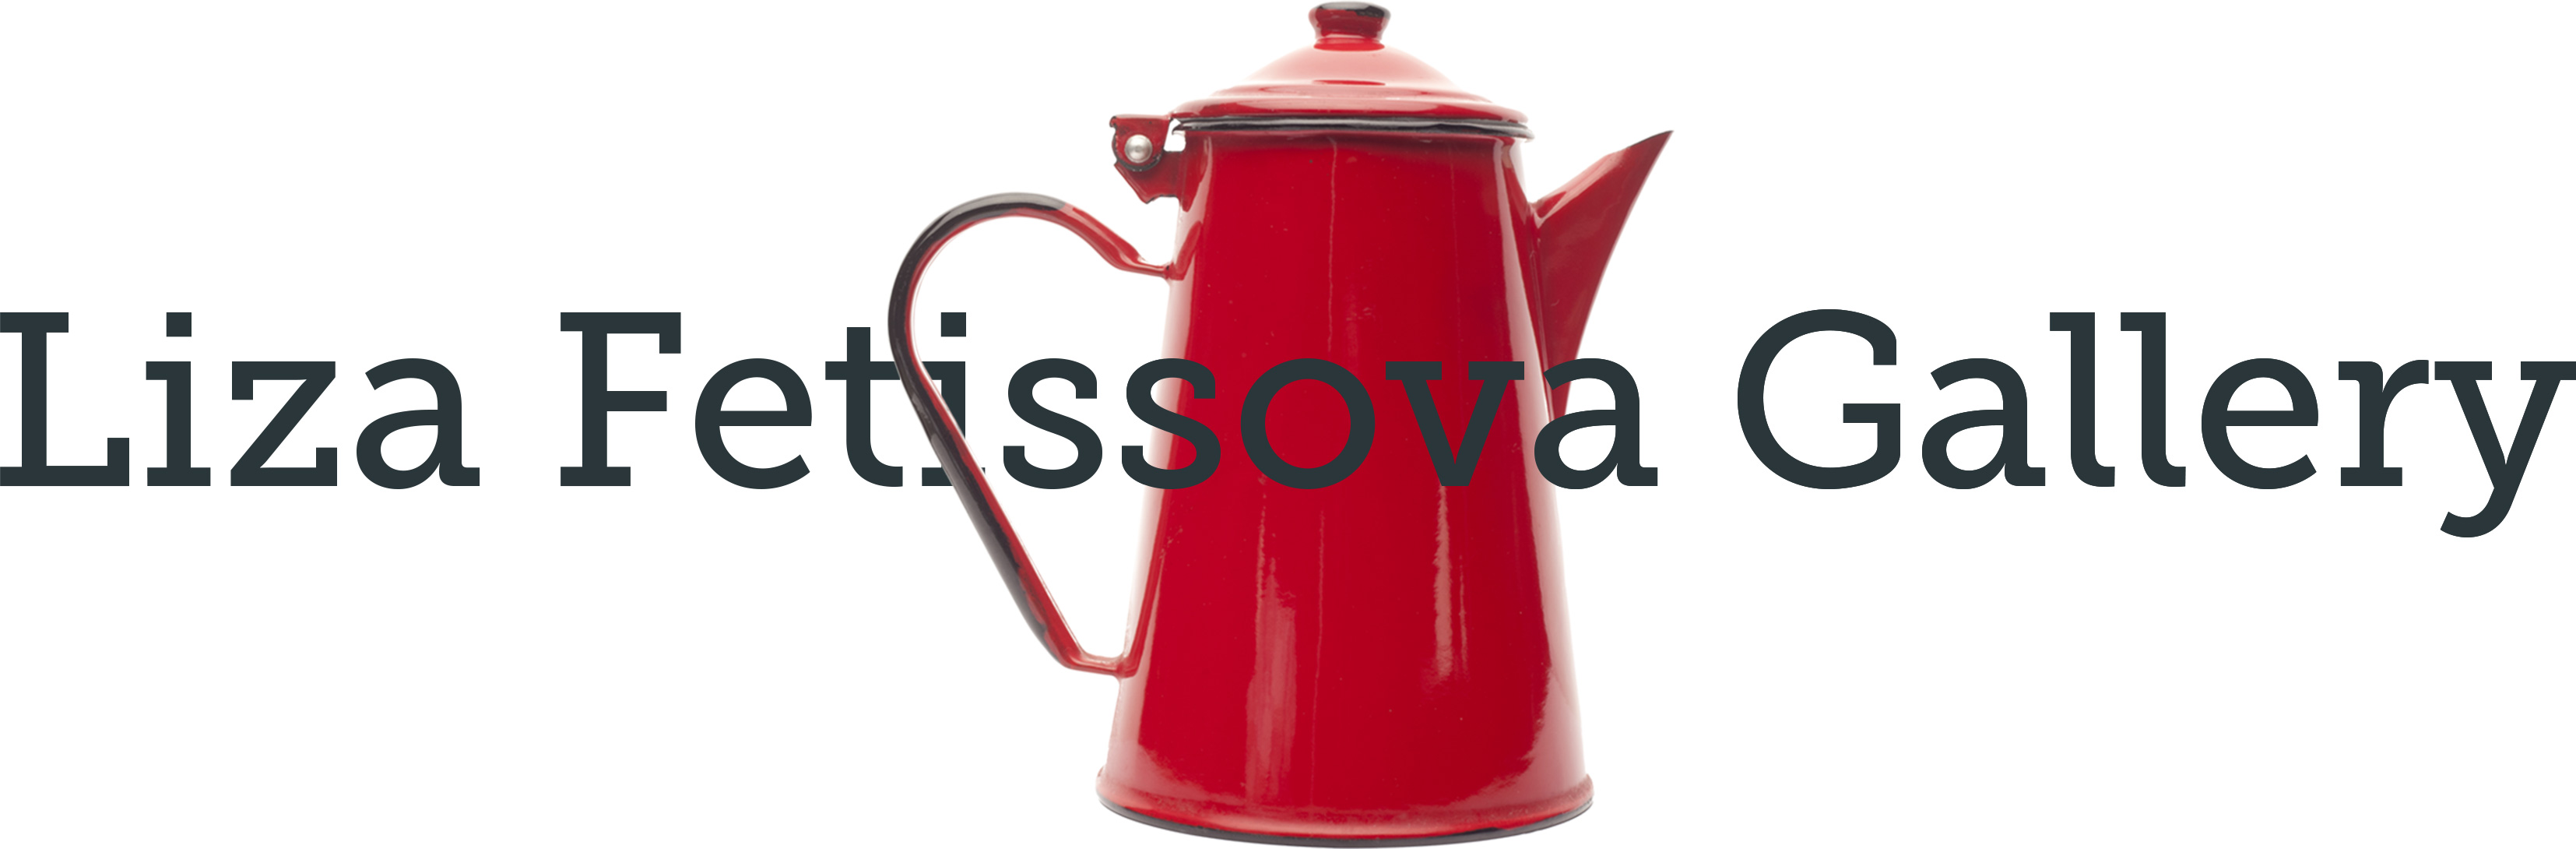 liza fetissova gallery title with a red russian style kettle, that resembles us about the late-time tea drinking and endless art discussions in the kitchen